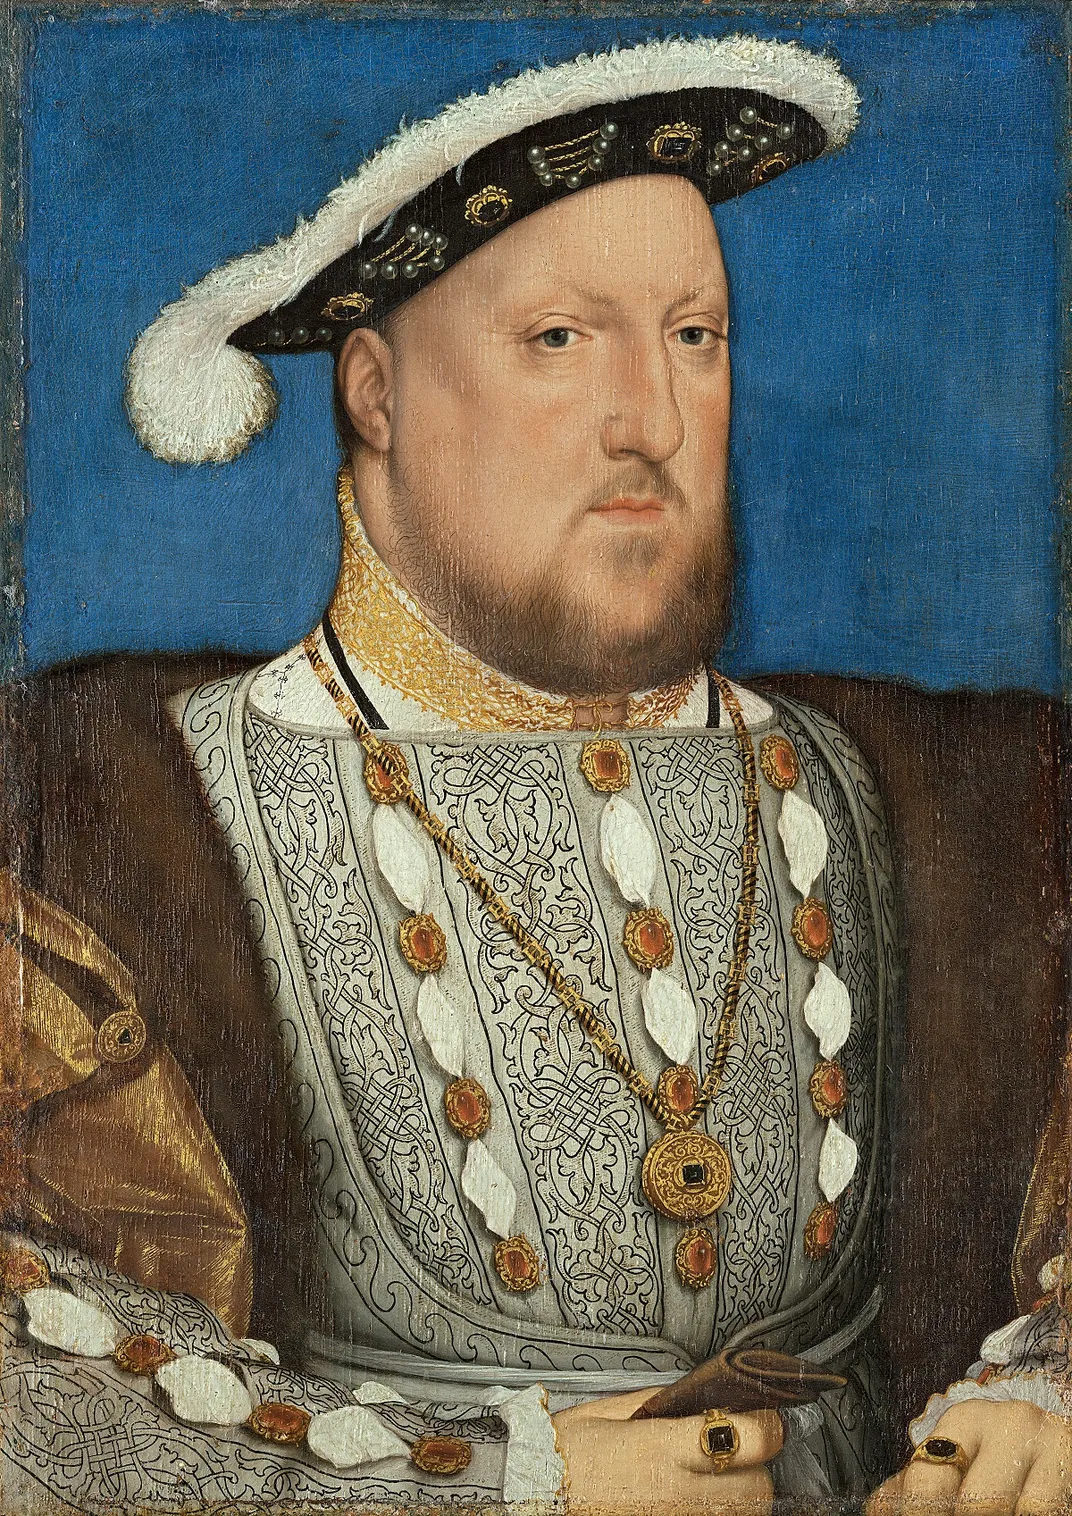 Hans Holbein the Younger, Henry VIII, circa 1537